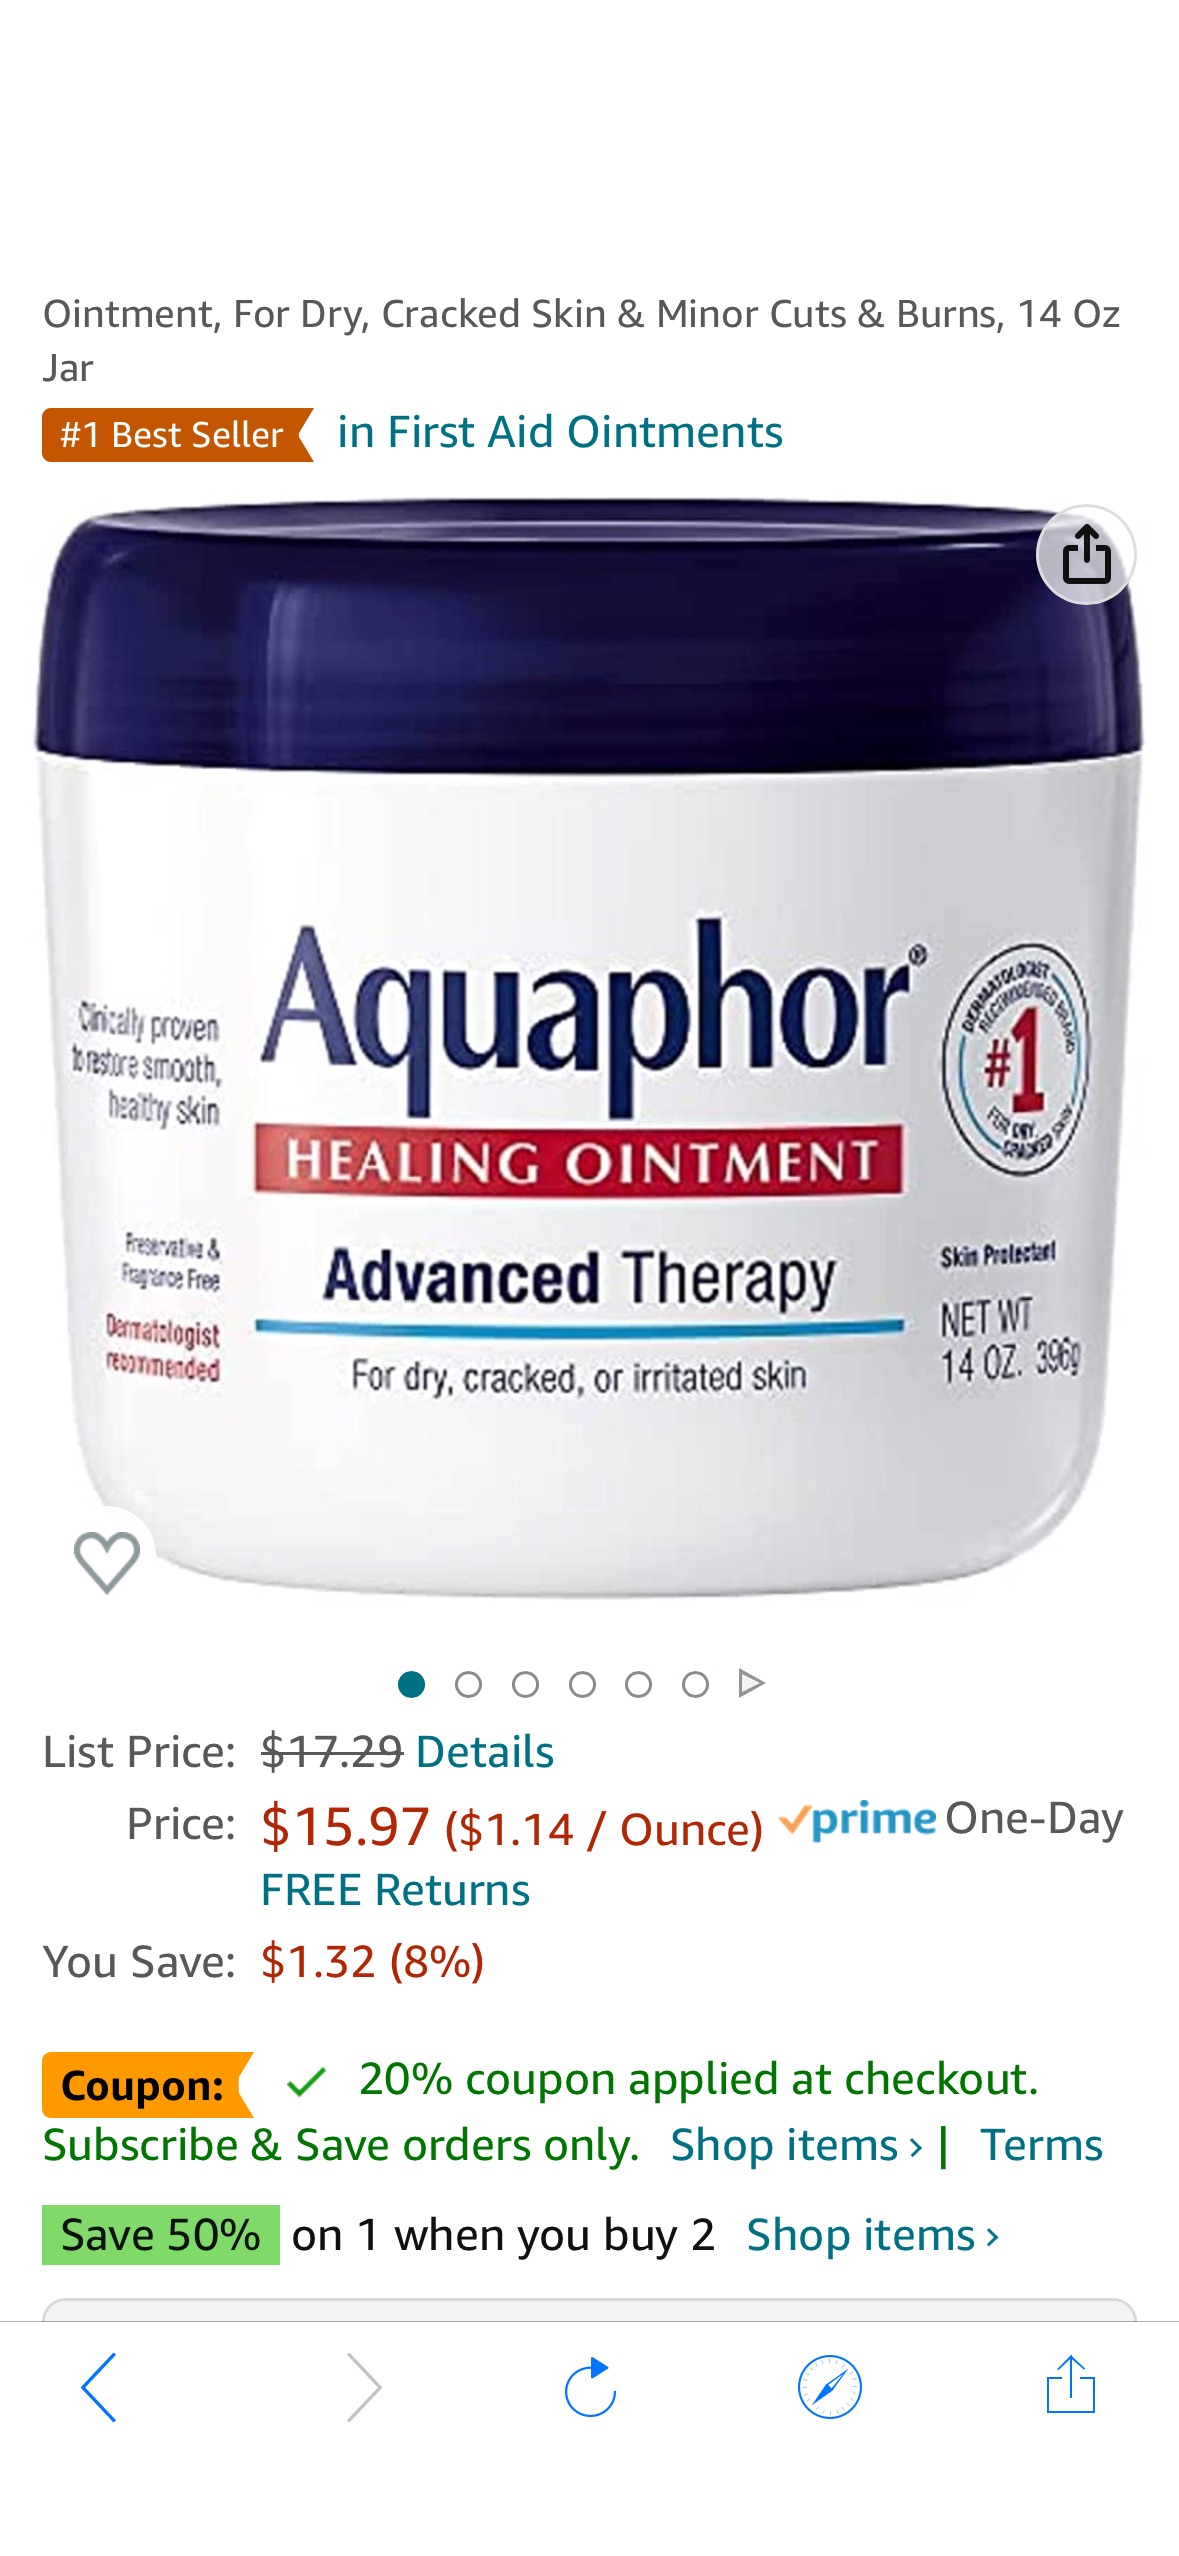 Amazon.com : Aquaphor Healing Ointment, Advanced Therapy Skin Protectant, Dry Skin Body Moisturizer, Multi-Purpose Healing Ointment, For Dry, Cracked Skin & Minor Cuts & Burns, 14 Oz Jar :修复霜